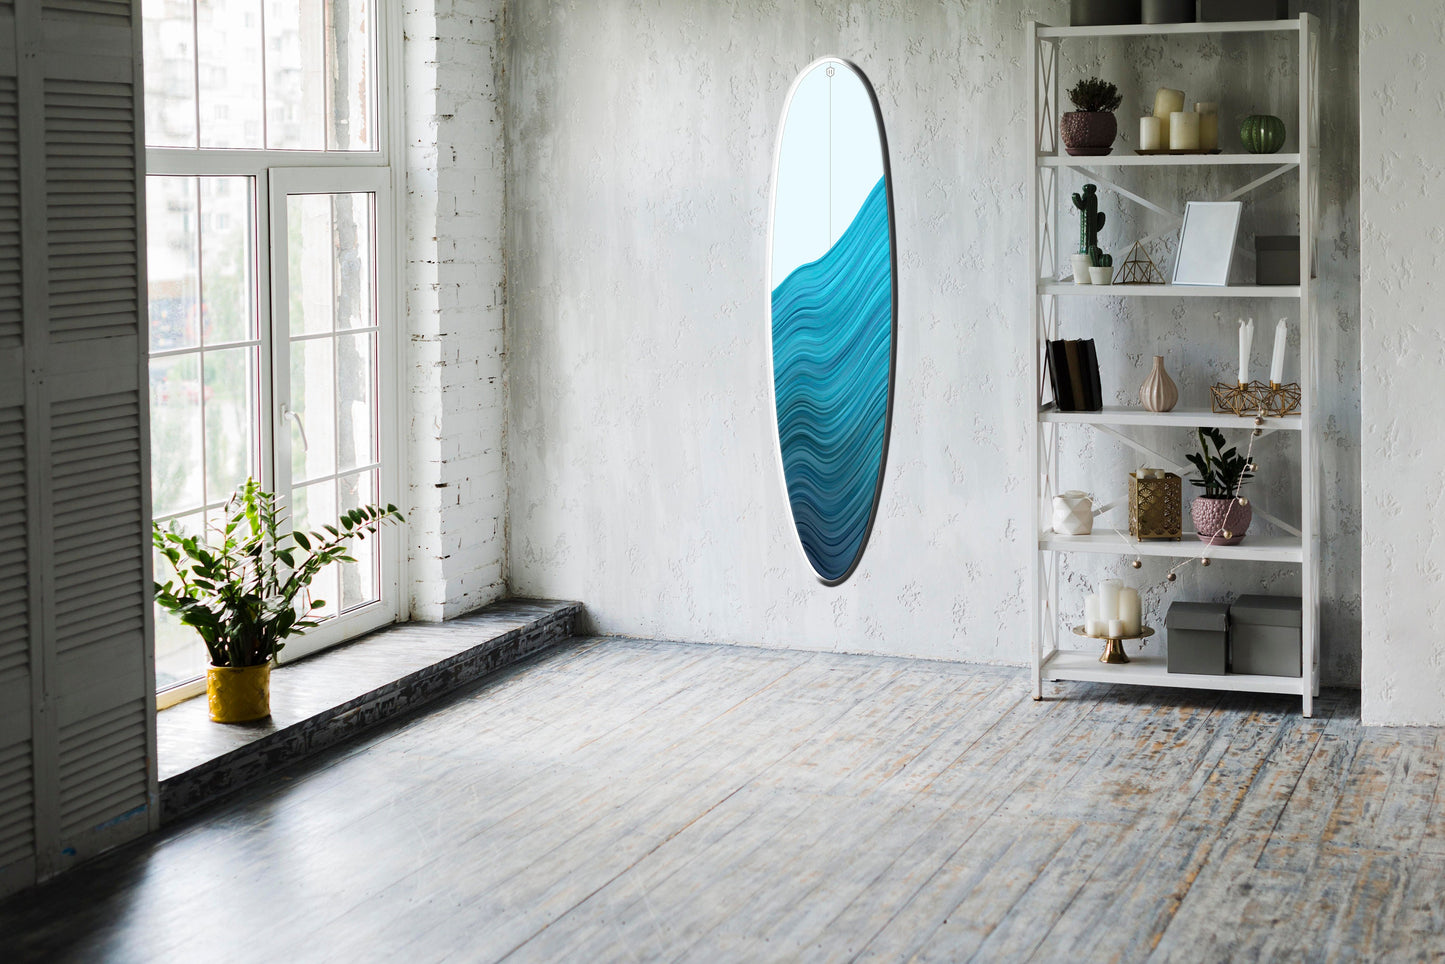 50' Decorative Wooden Surfboard Wall Hanging with Blue Ocean Wave Pattern